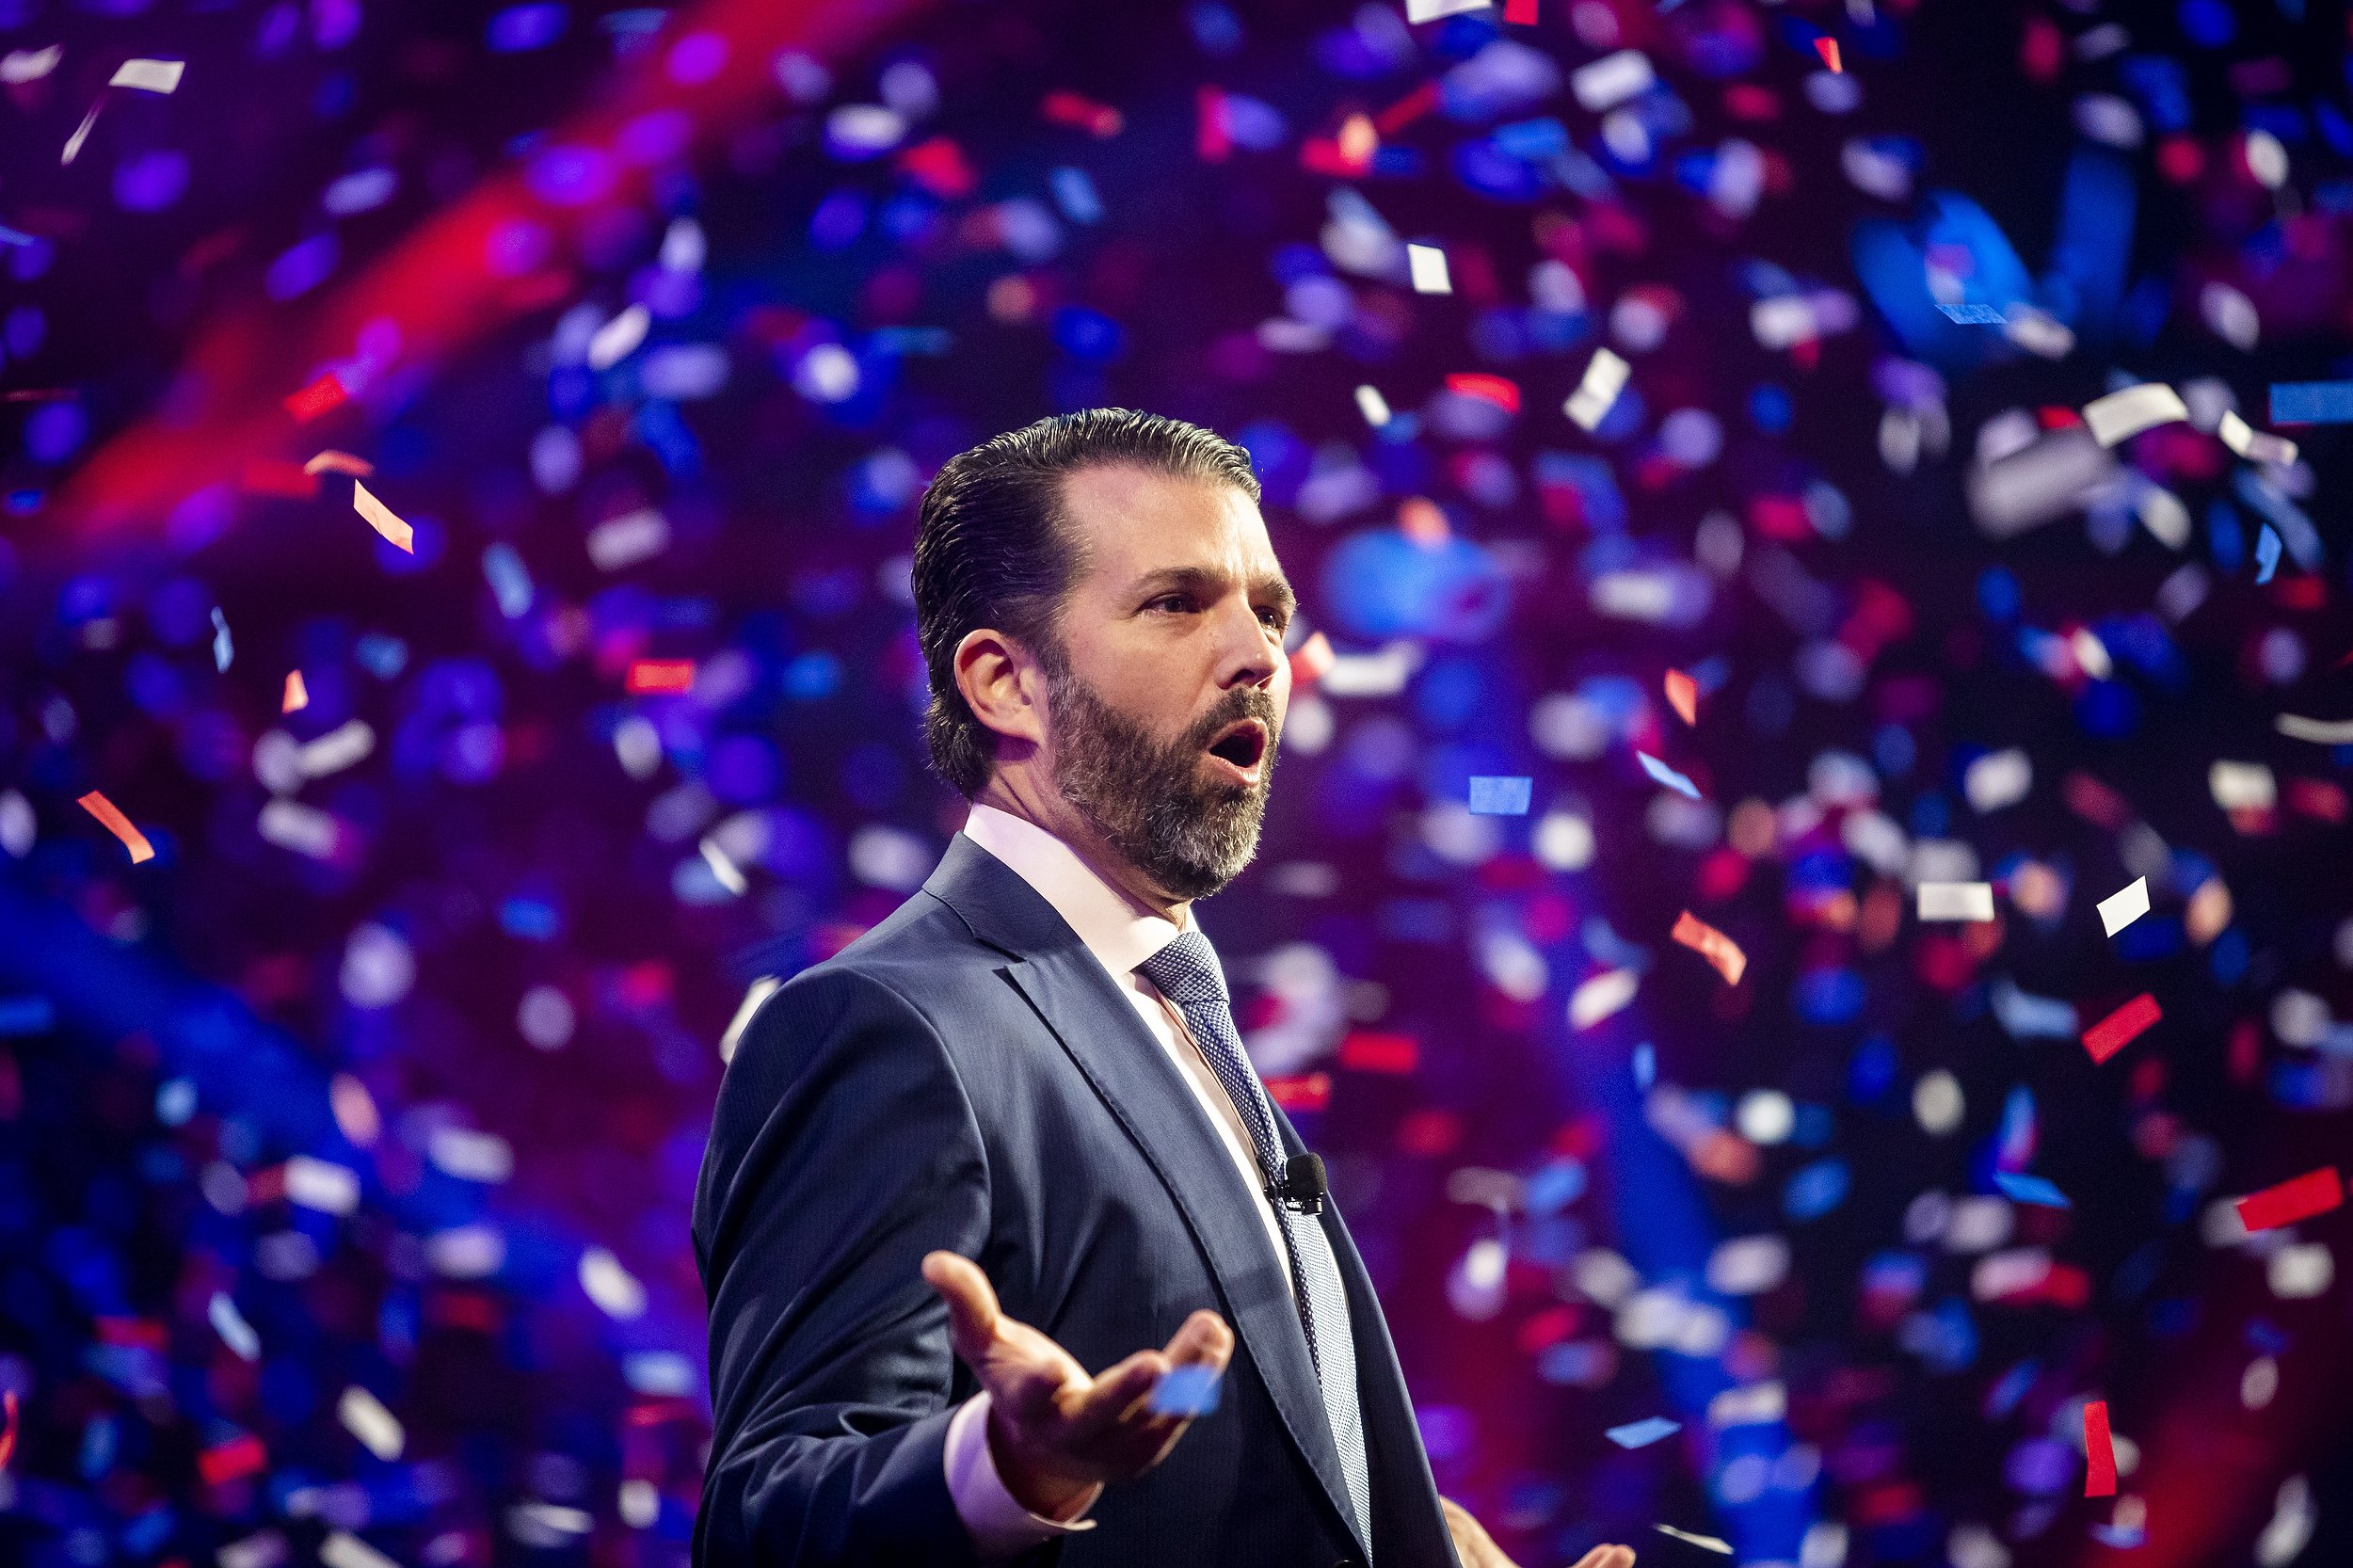  Donald Trump Jr. reacts to a cheering crowd before giving a speech during the second day of the America Fest 2021 hosted by Turning Point USA on Sunday, Dec. 19, 2021, in Phoenix.  